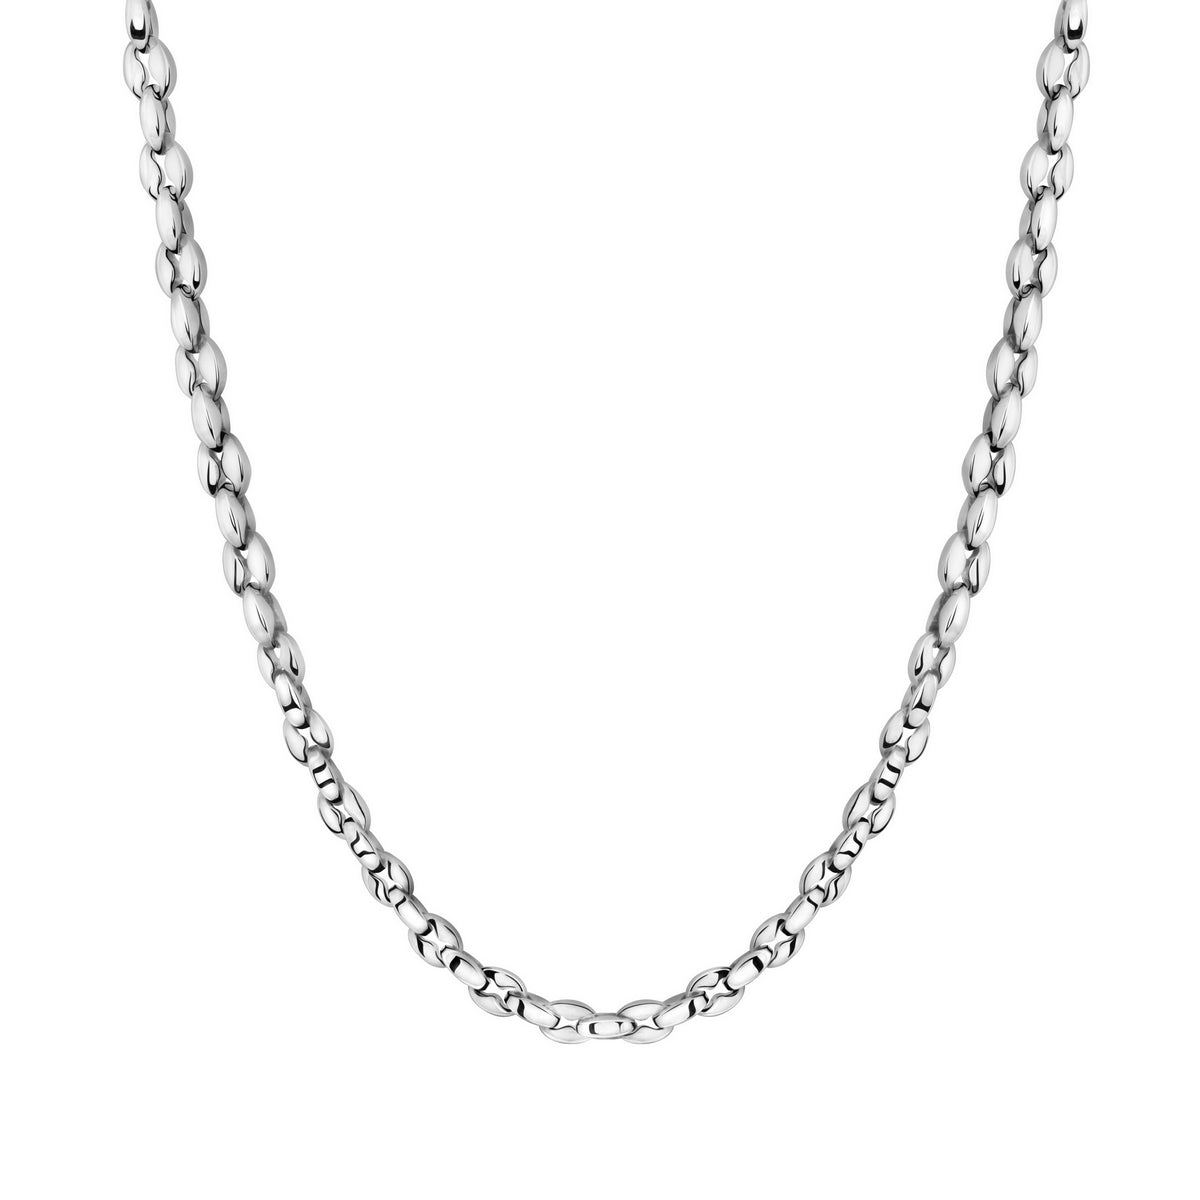 sector energy necklace stainless steel 45 & 5cm